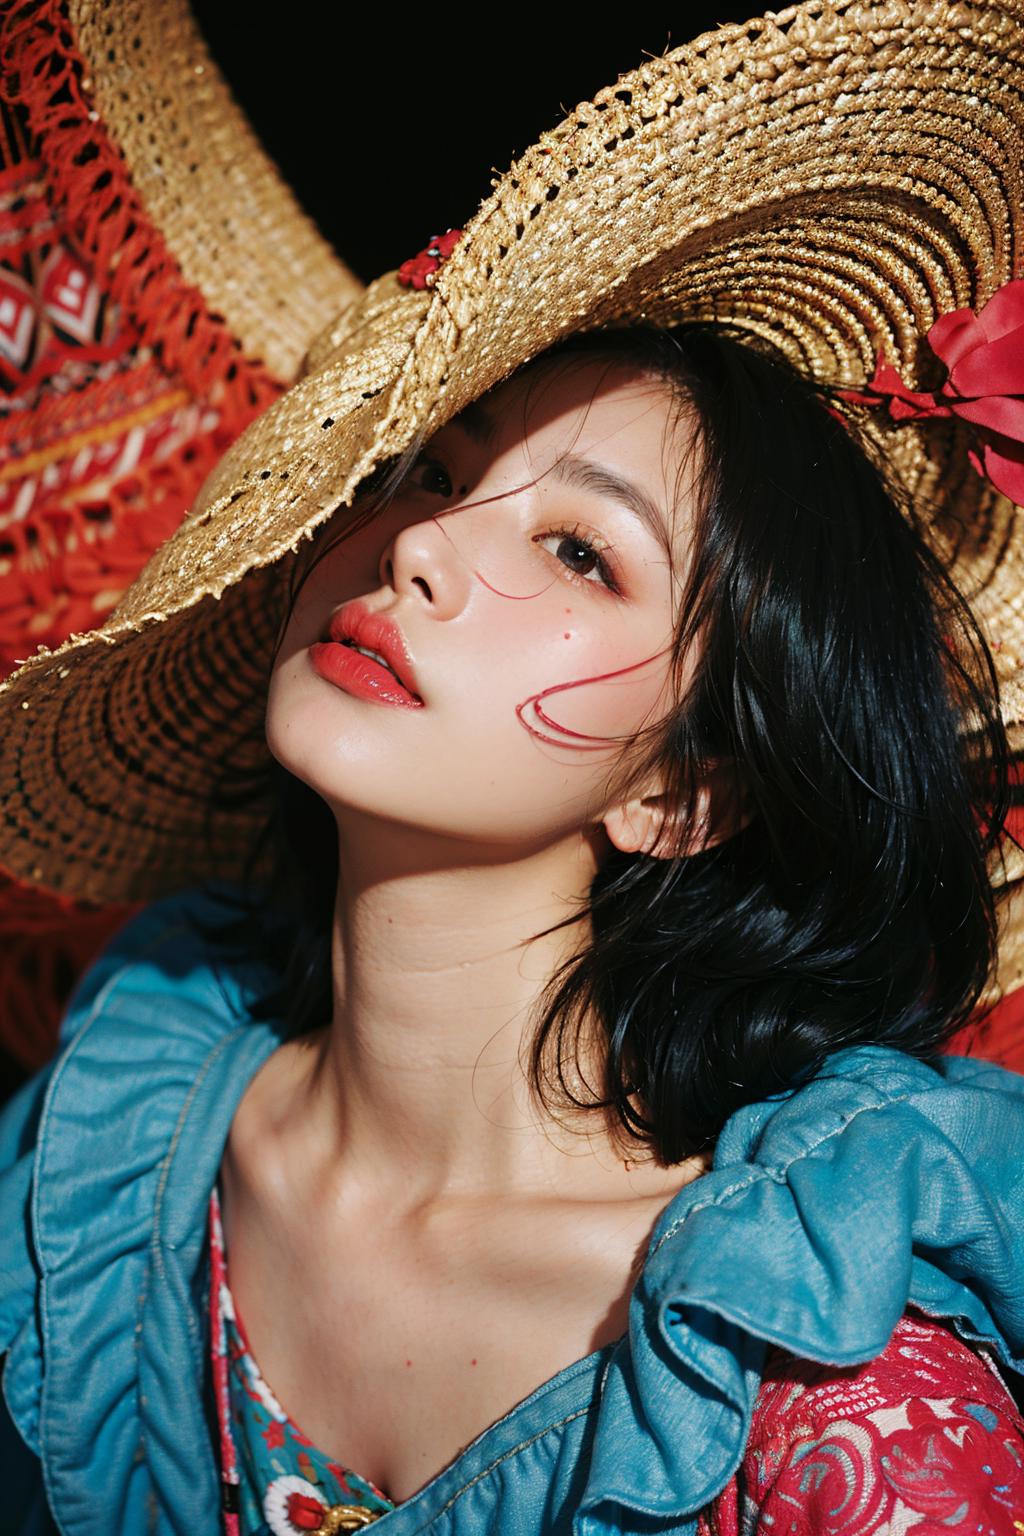 A young Asian girl wearing a straw hat with a red flower and red lipstick, looking up.